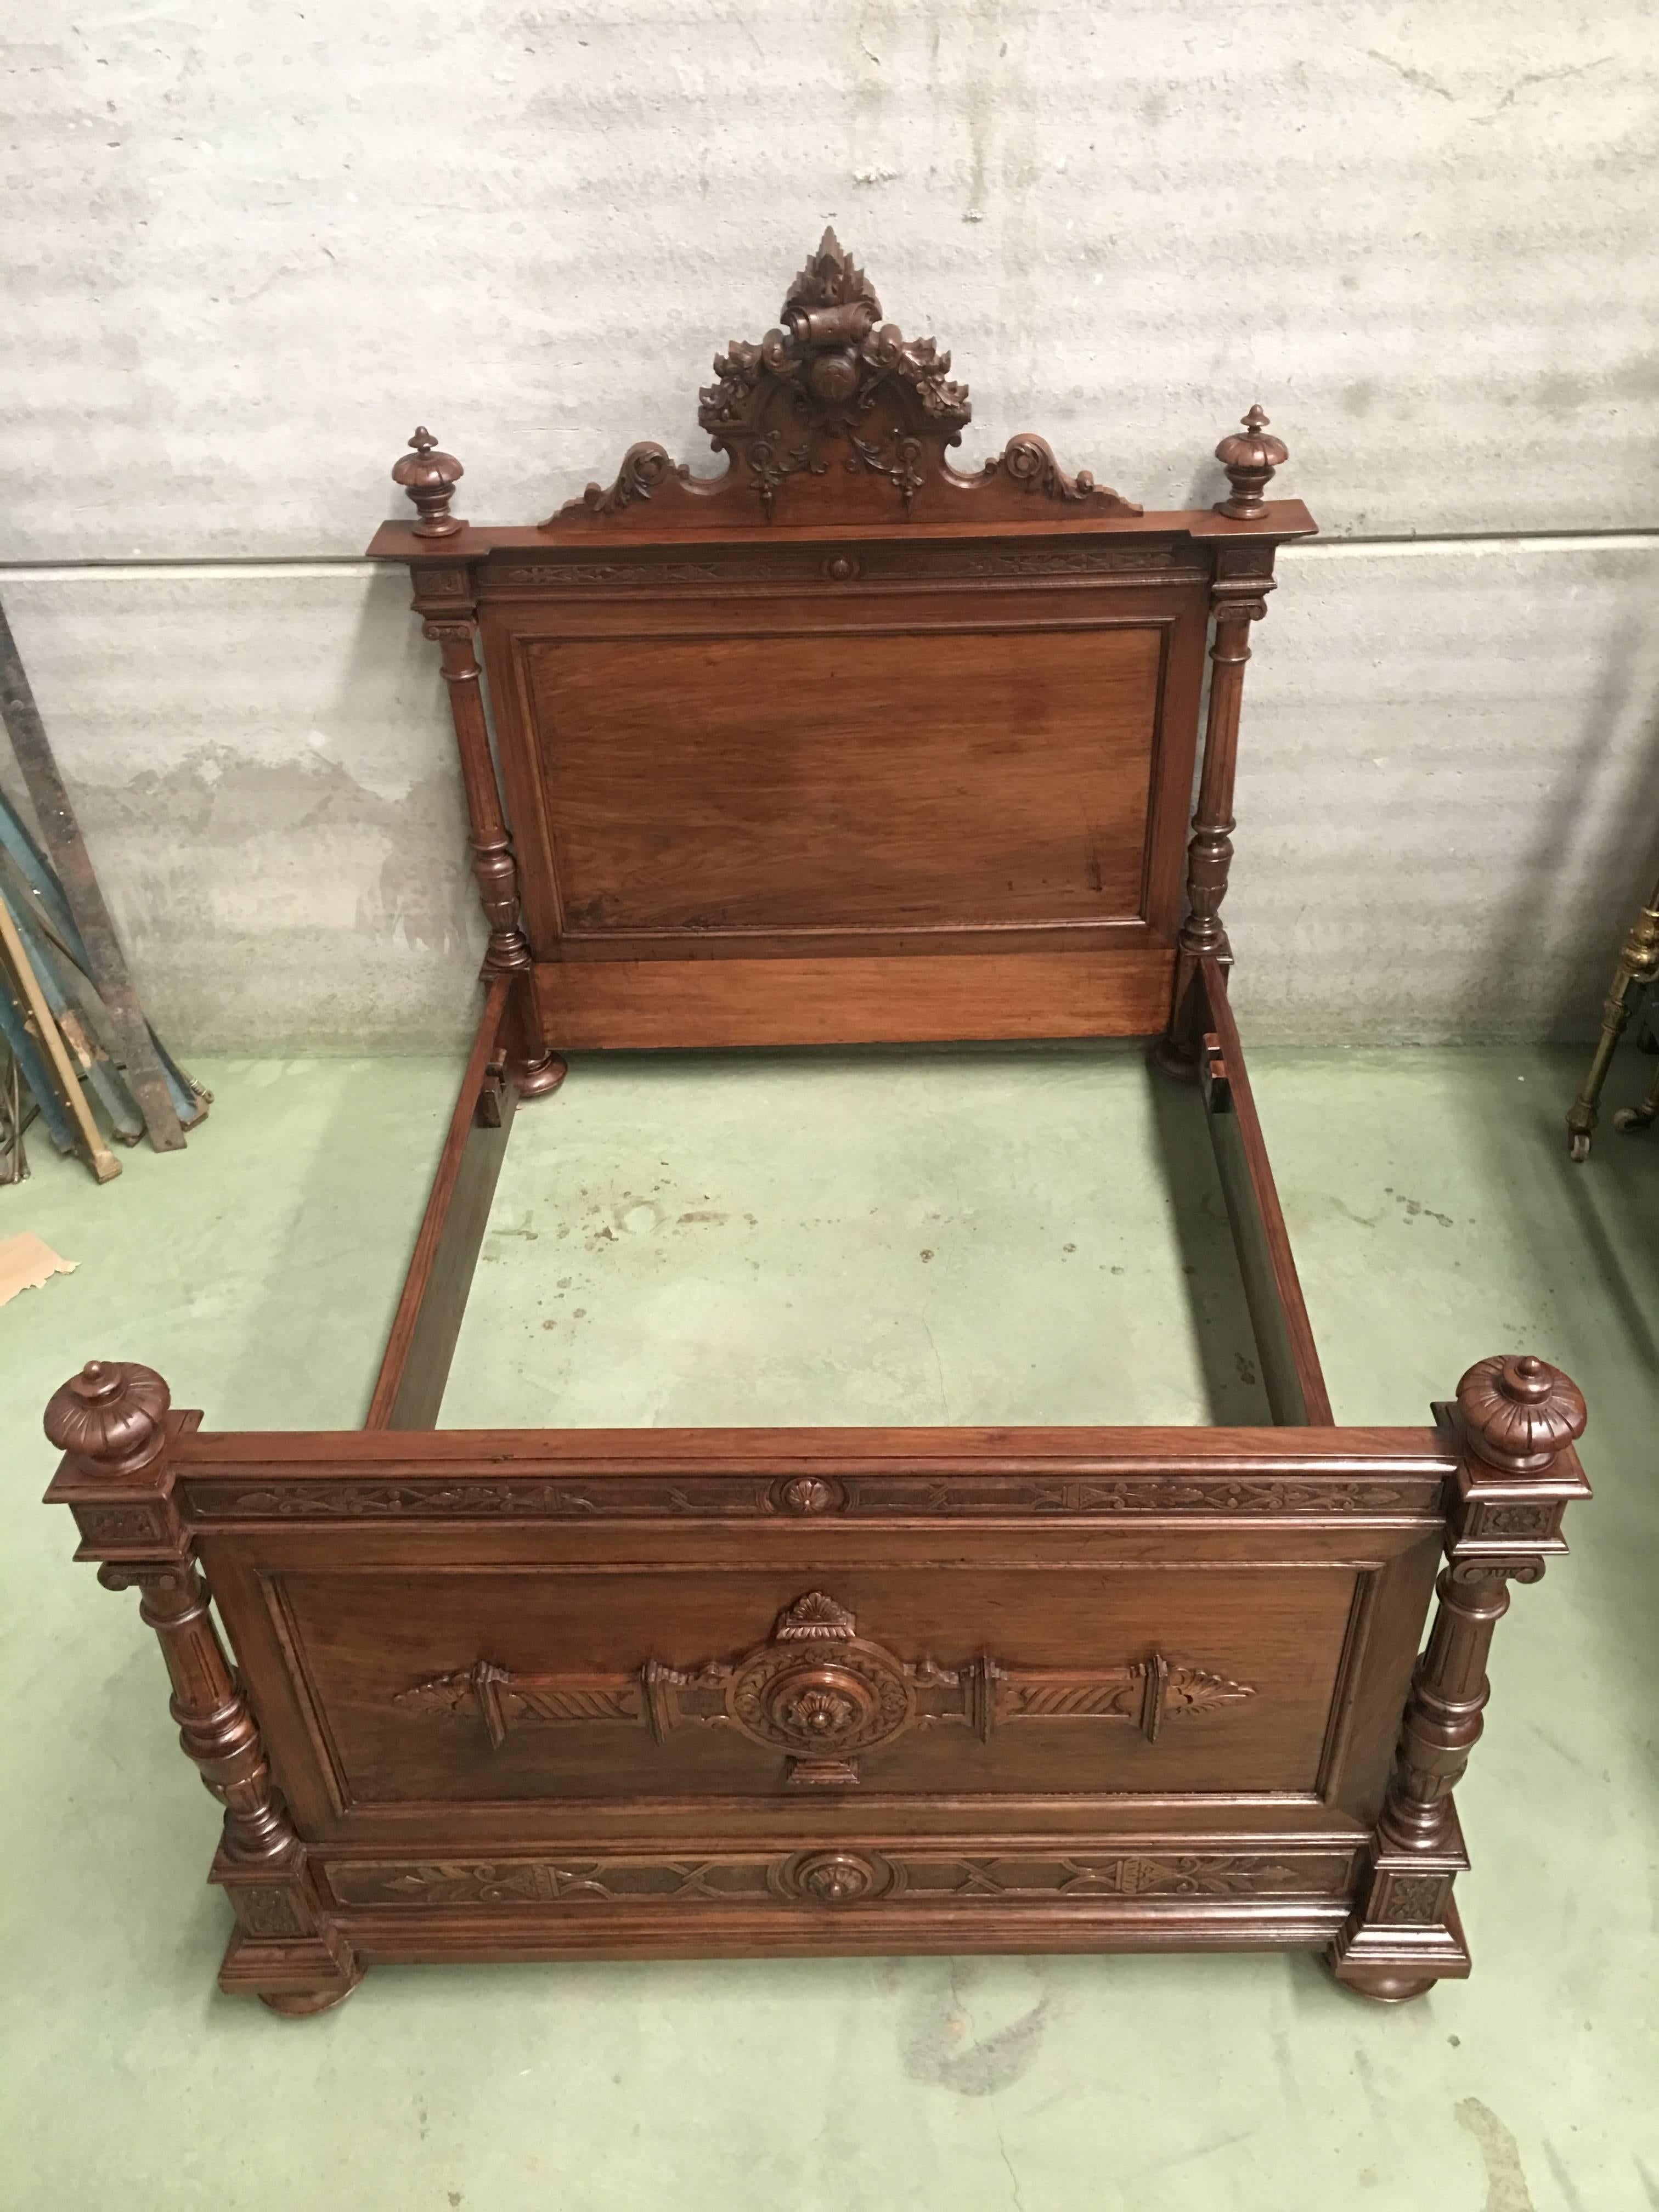 19th century Italian renaissance carved walnut full or queen bed.

19th century Italian renaissance walnut bed represent the essence of the style with elaborately carved bas relief and full relief naturalistic motifs across the entire visible